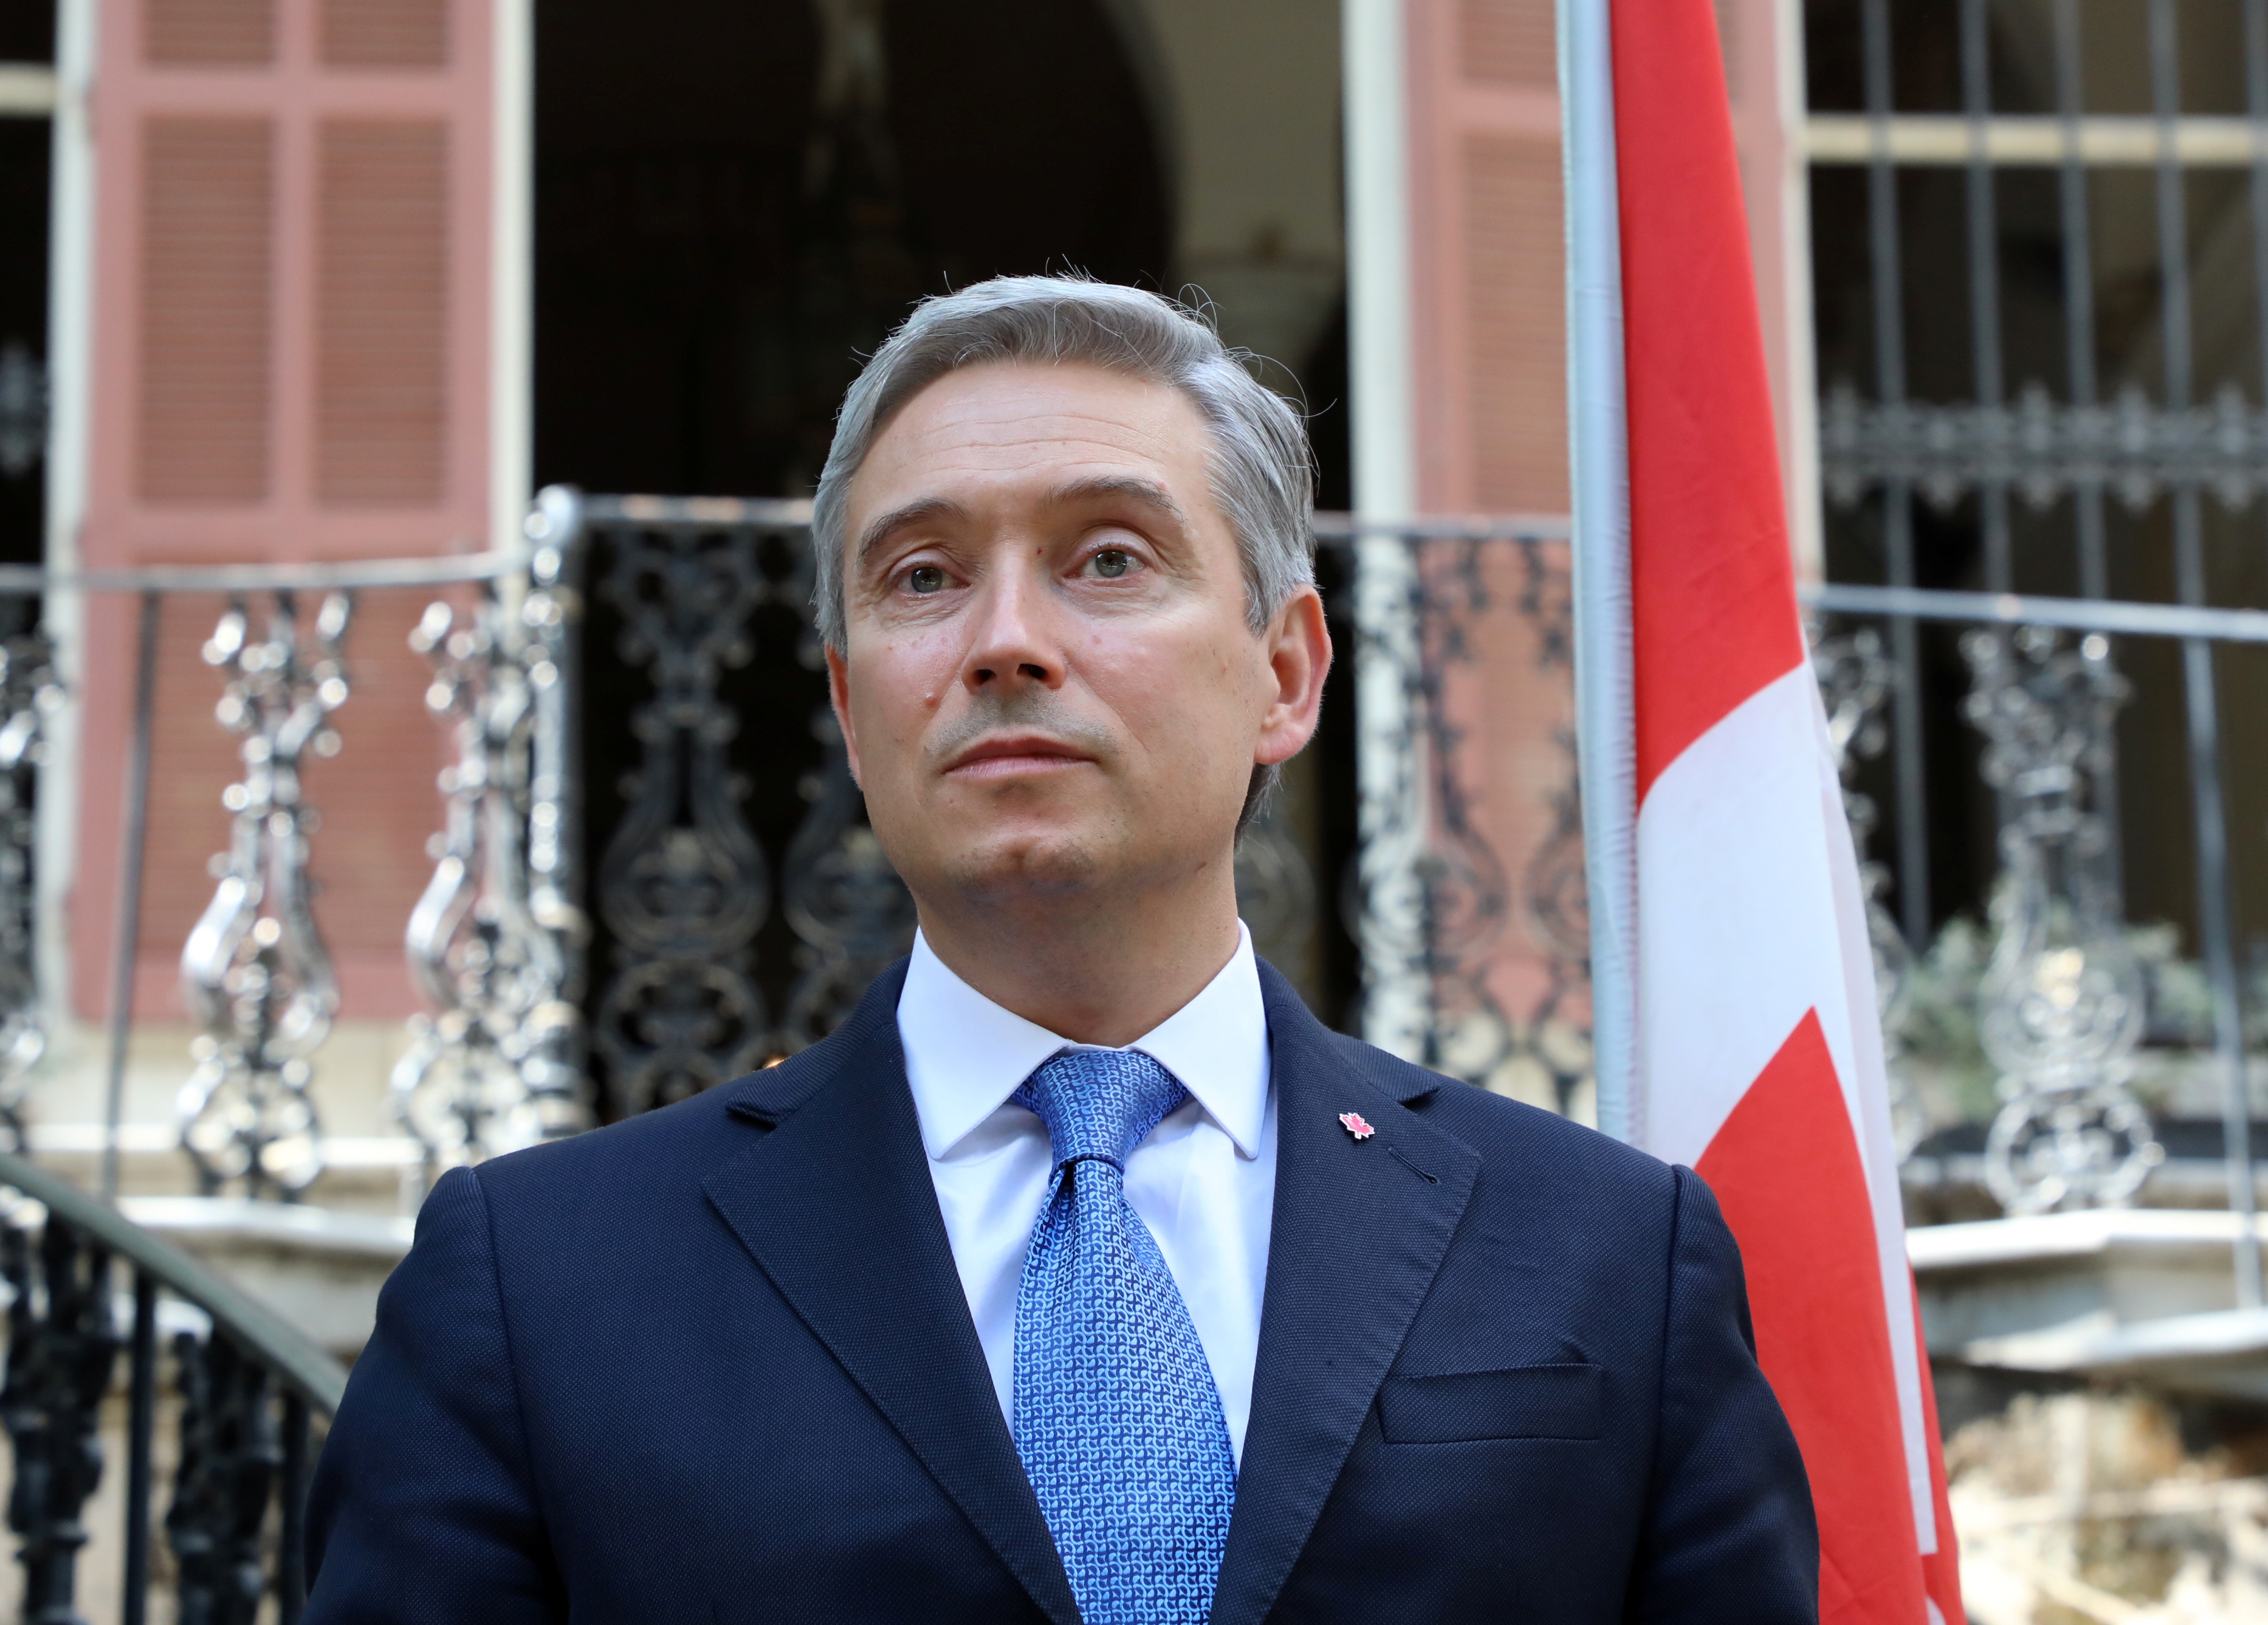 Canadian Foreign Minister Francois-Philippe Champagne is seen at the Ministry of Foreign Affairs in Beirut